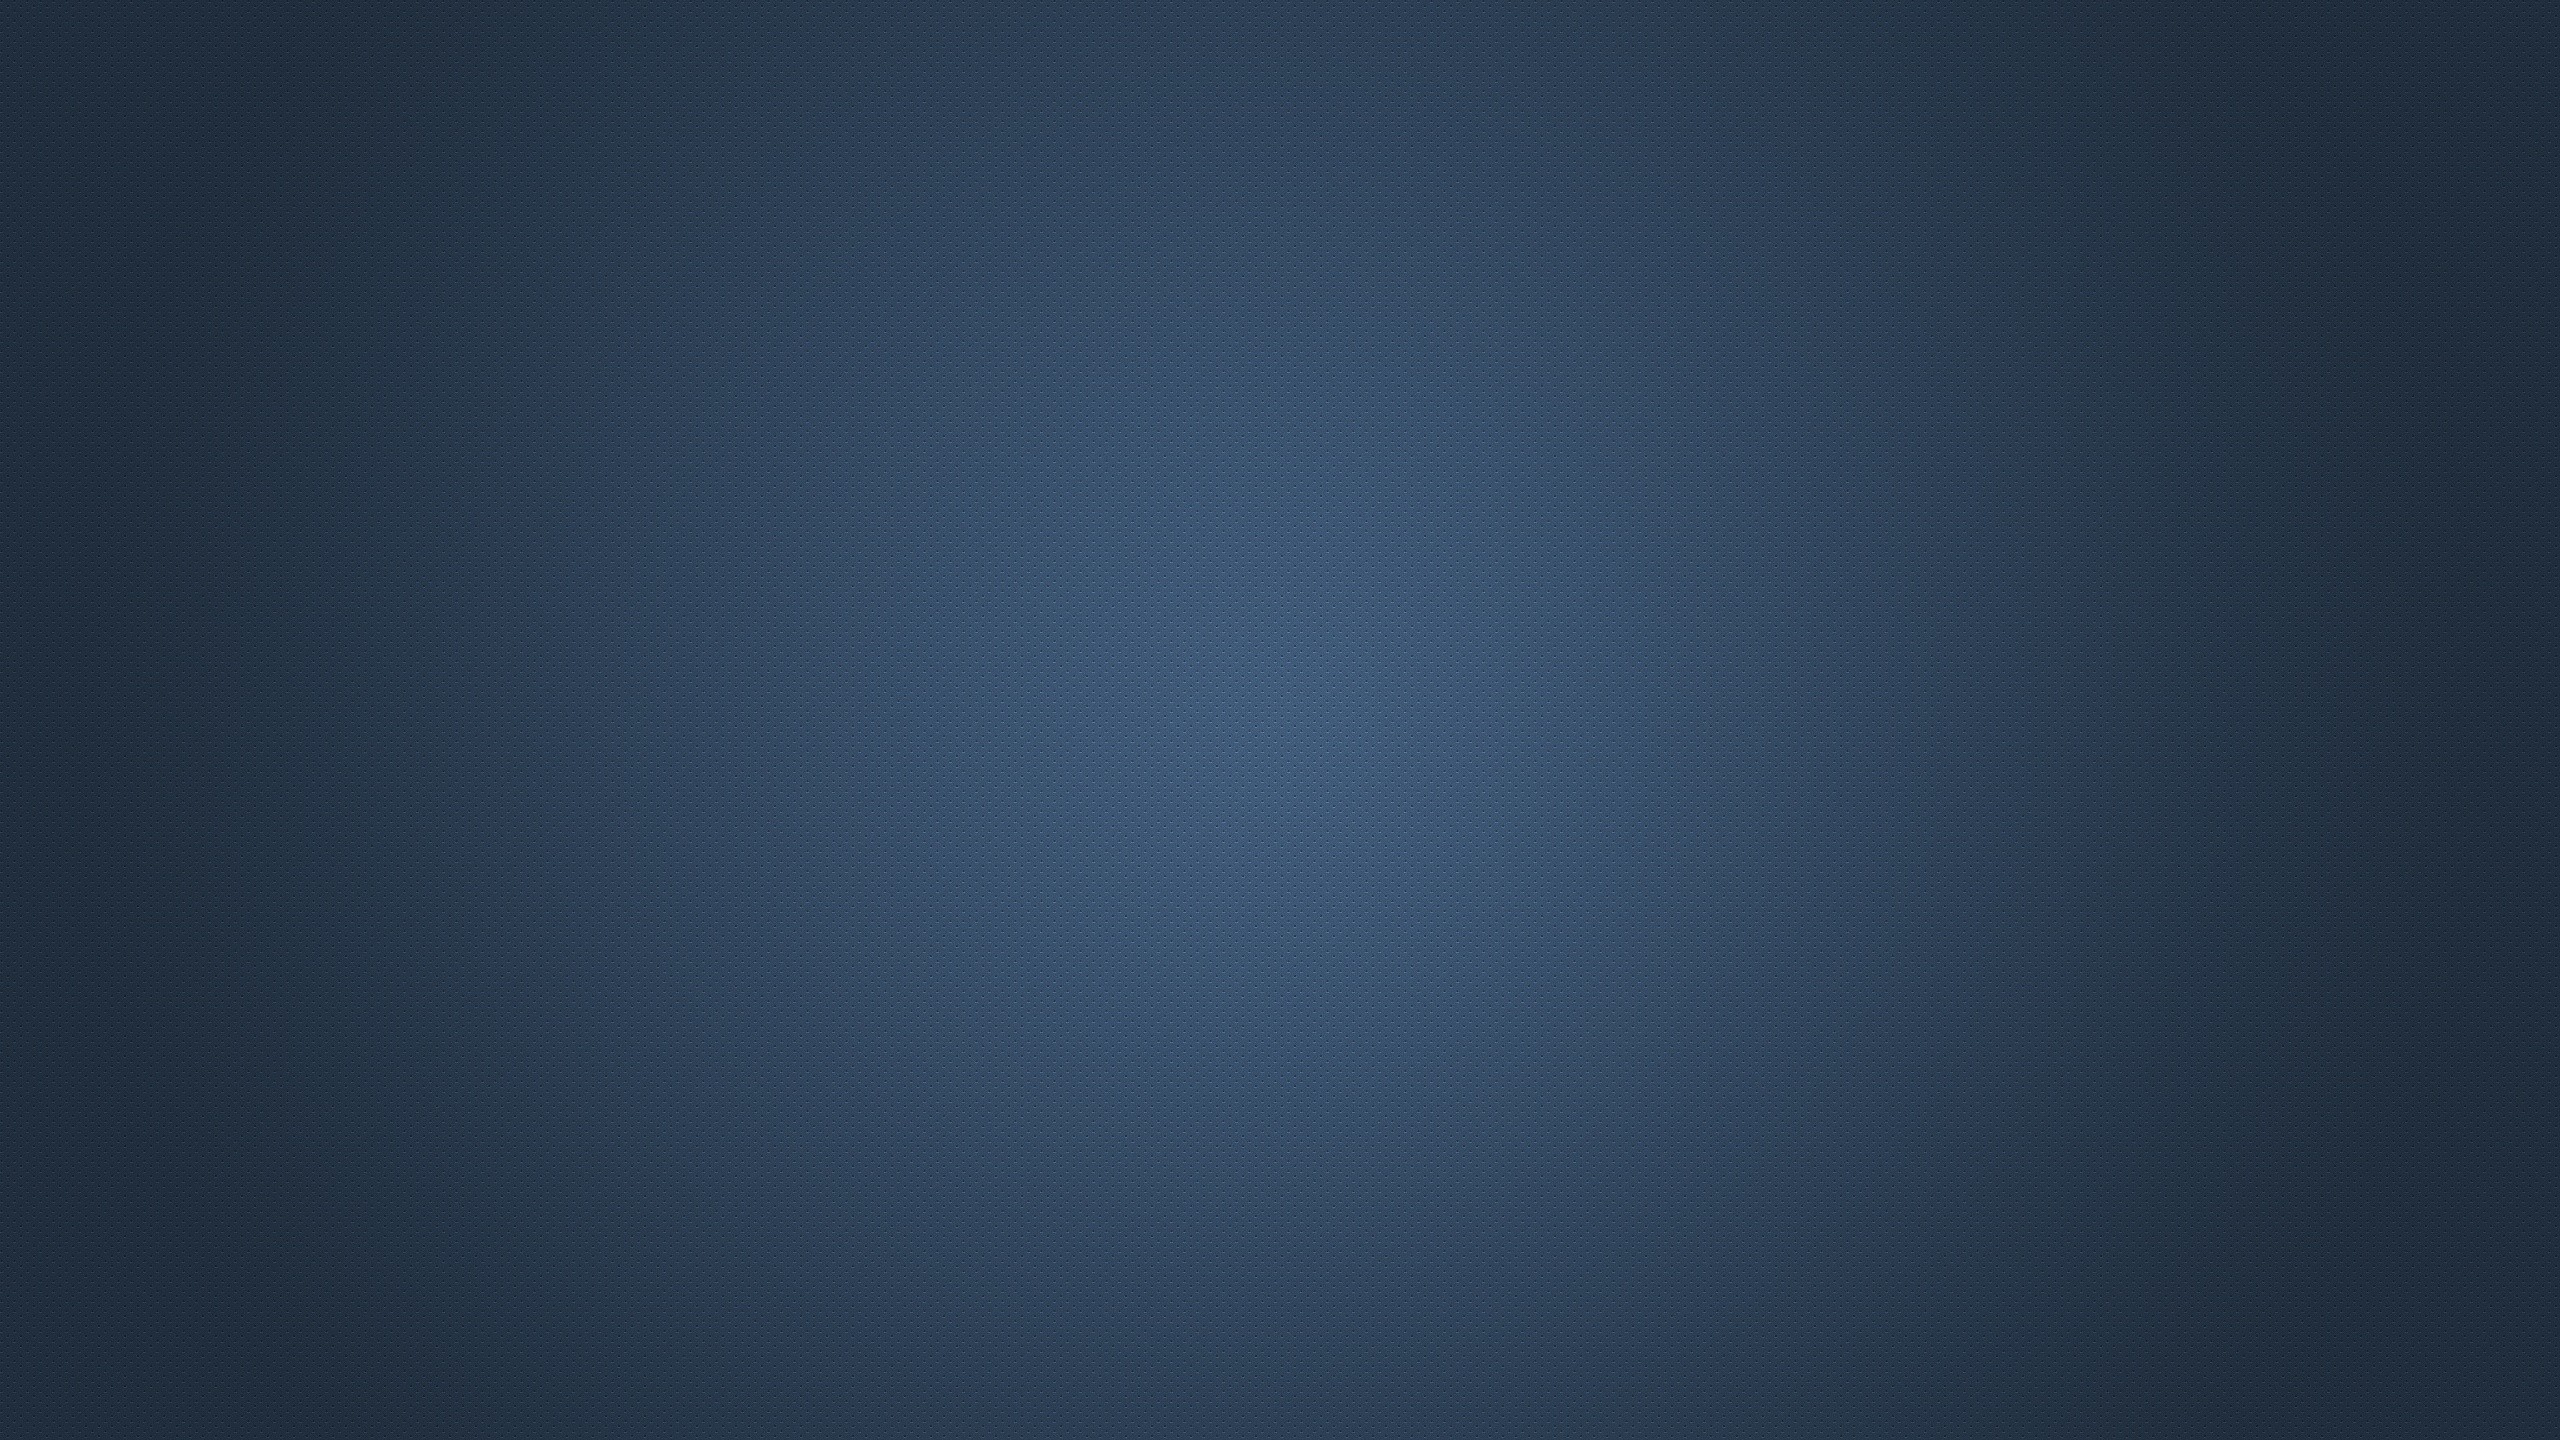 2560x1440  Dark Blue Pattern. How to set wallpaper on your desktop? Click  the download link from above and set the wallpaper on the desktop from your  OS.